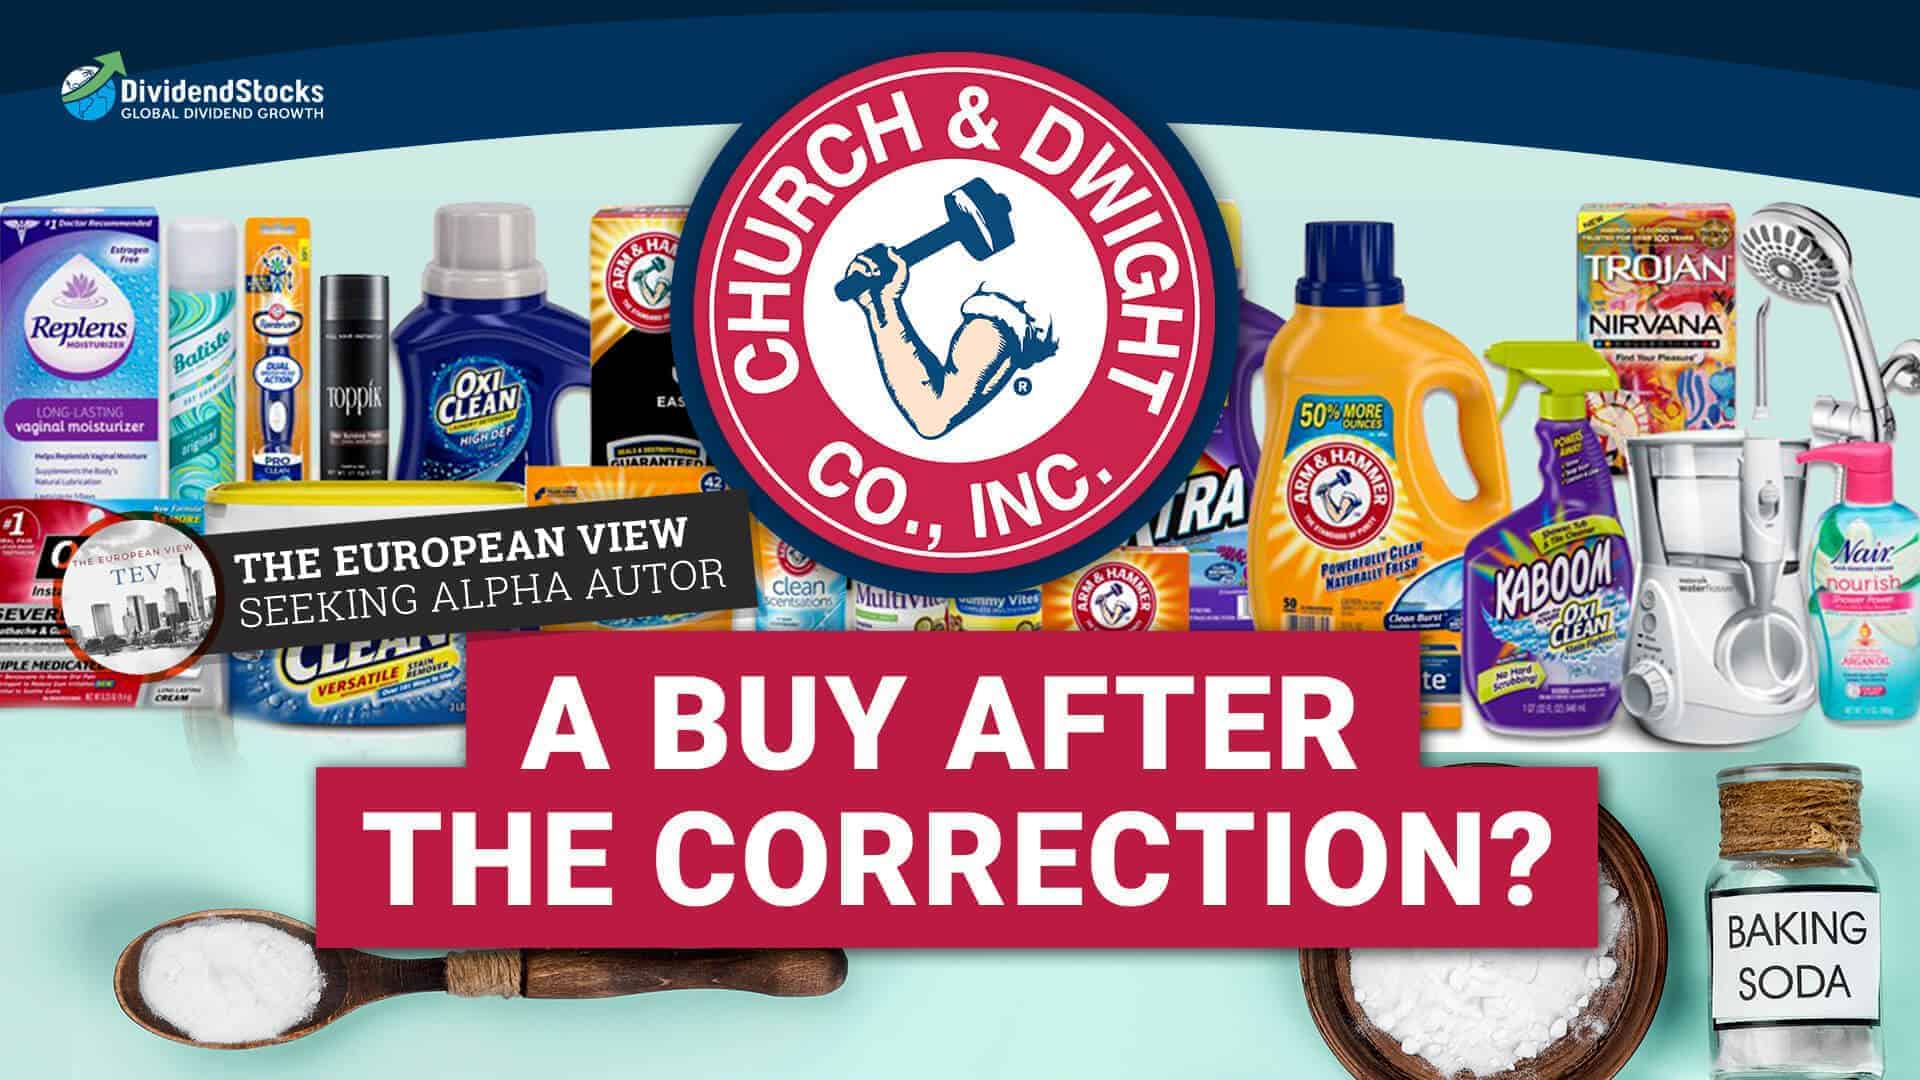 church & dwight stock - a buy after the correction?